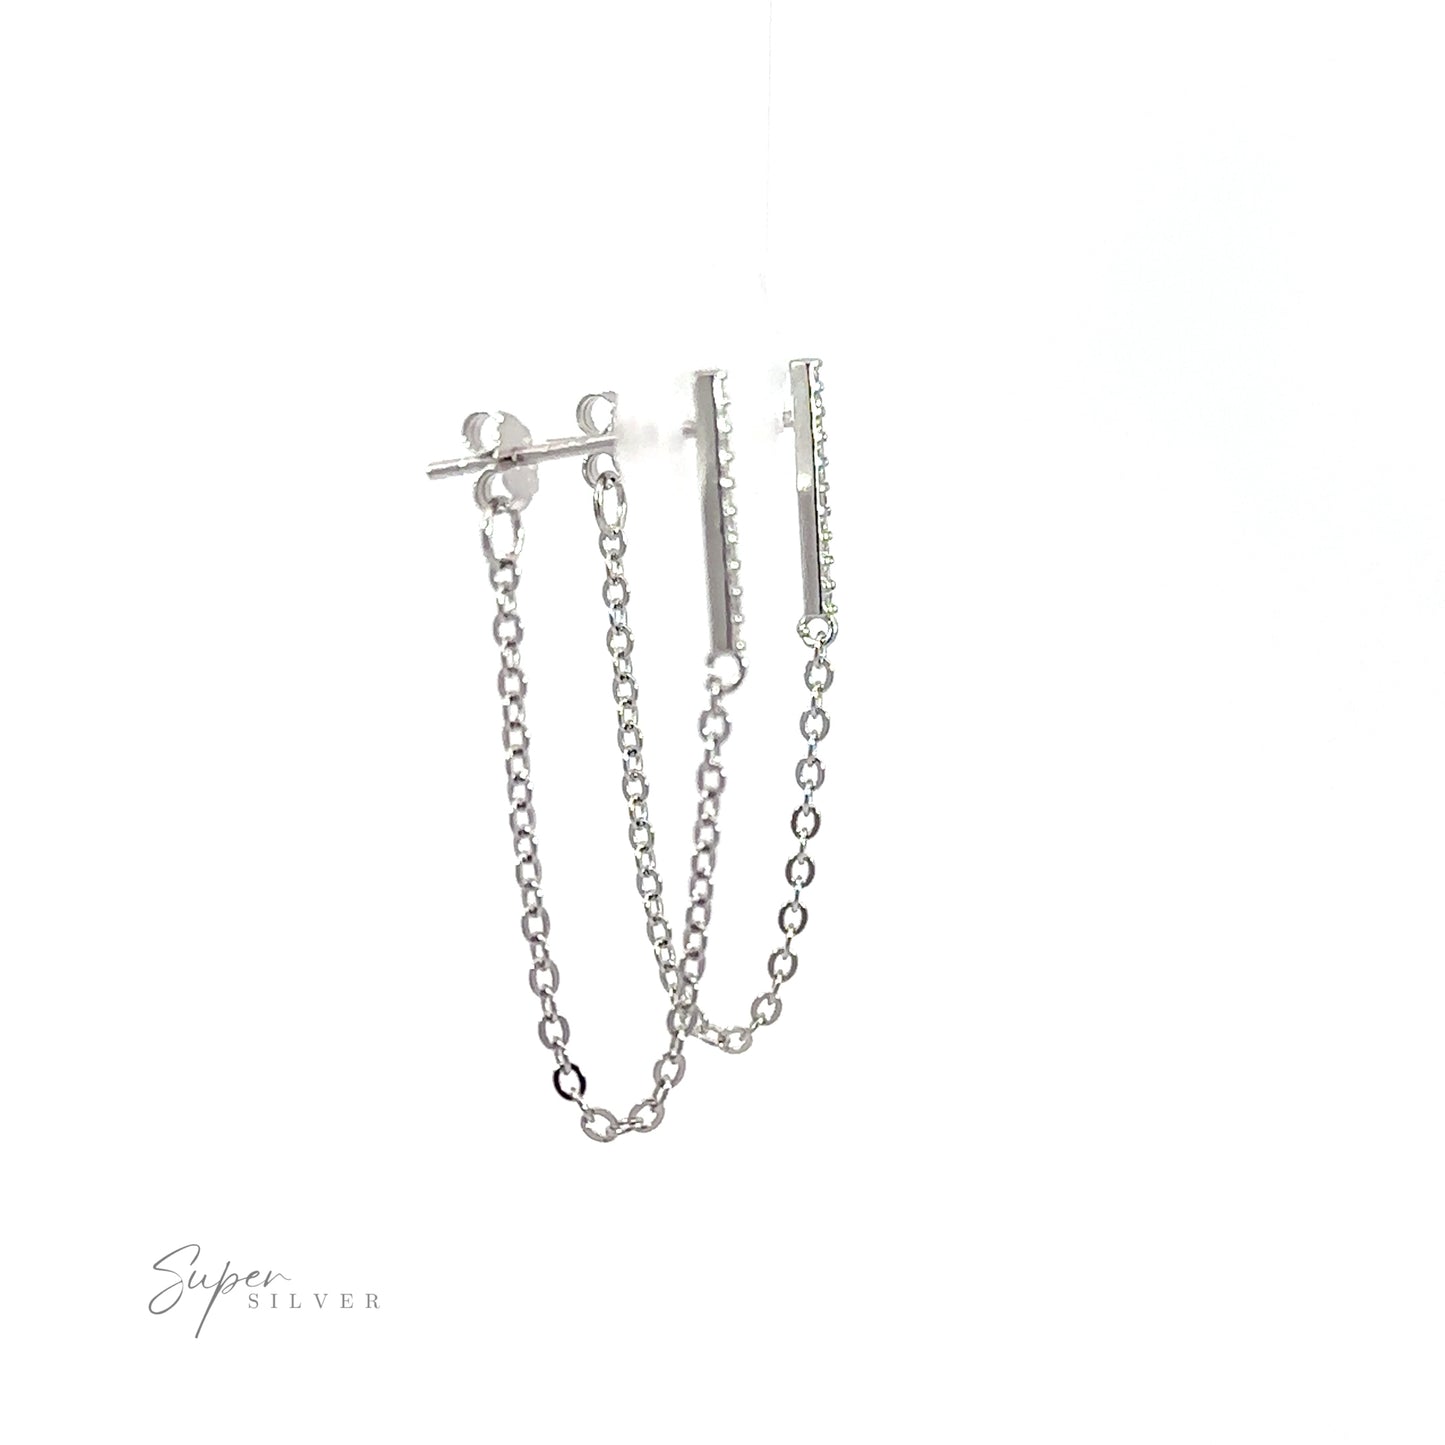 A pair of CZ Bar Studs with Chain, perfect for everyday wear, hanging on a white background.